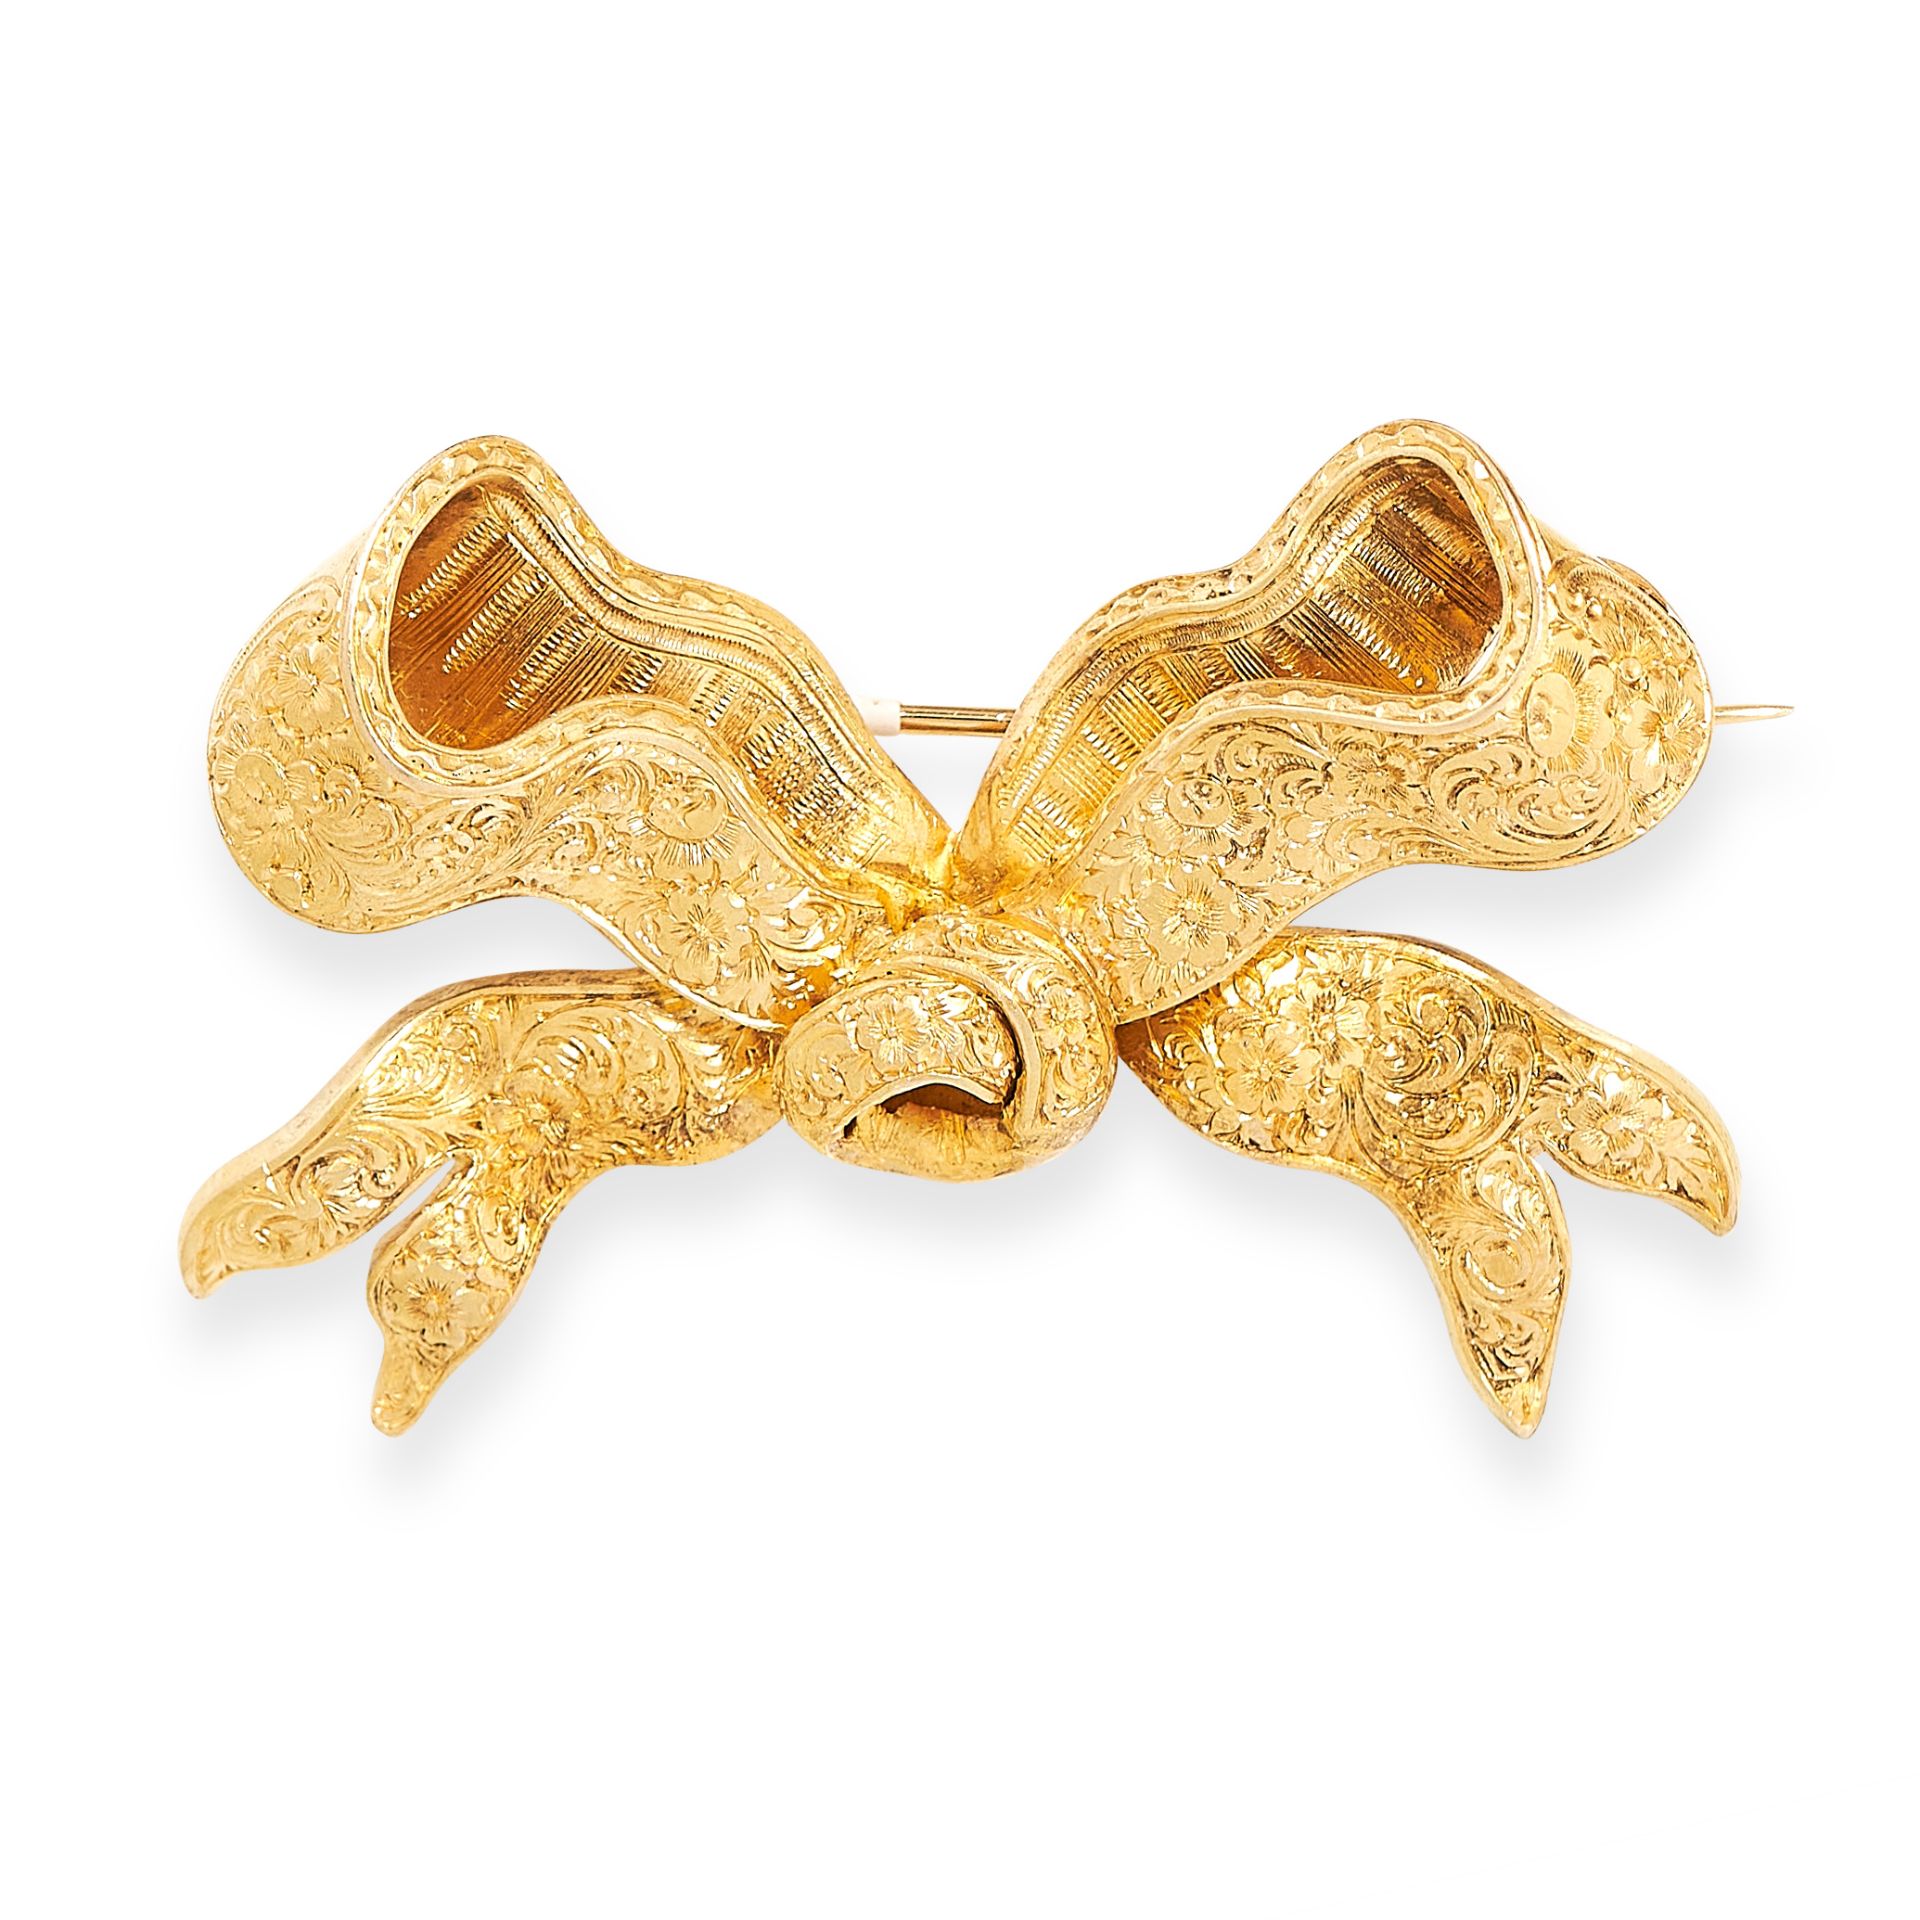 ANTIQUE GOLD BOW BROOCH, 19TH CENTURY in 18ct yellow gold, designed as a ribbon tied in a bow,